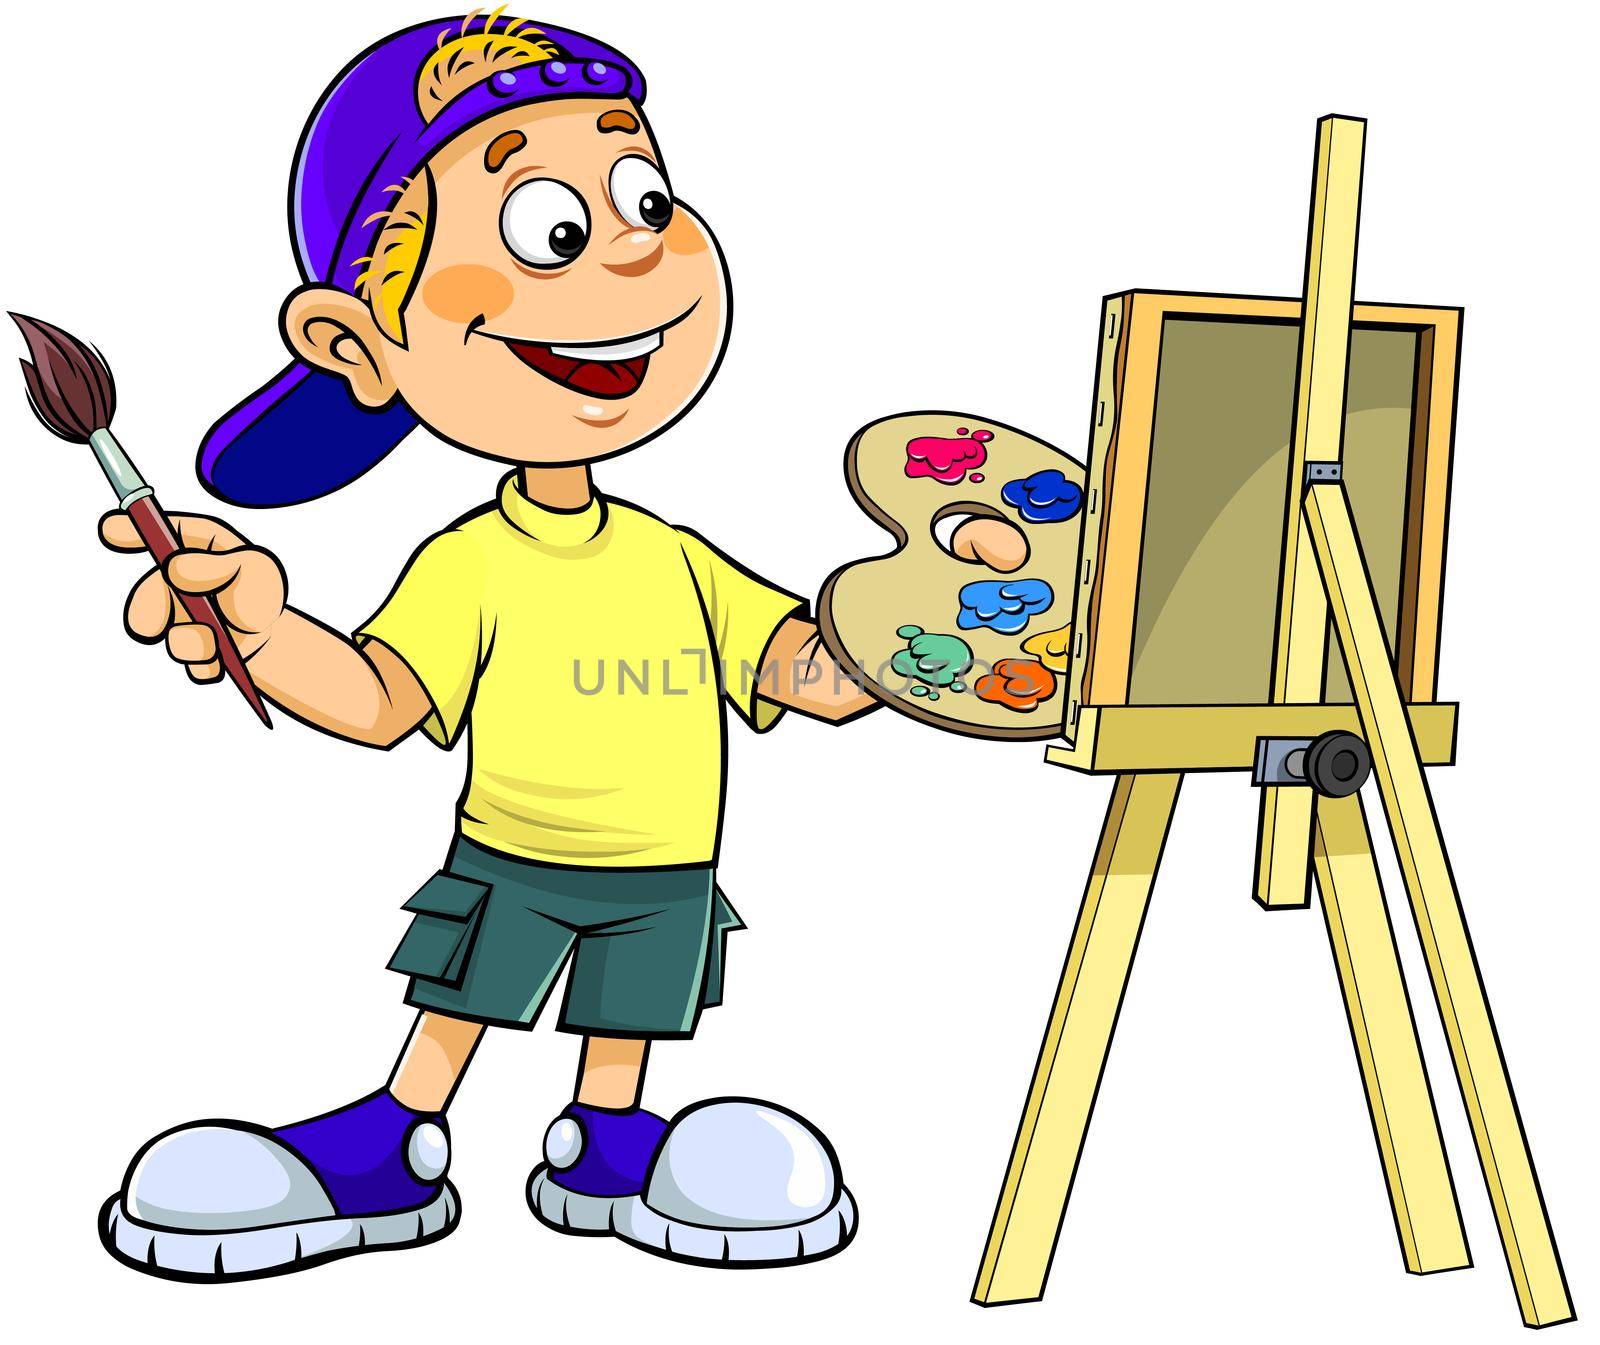 A color illustration of a cartoon smiling boy painting on canvas